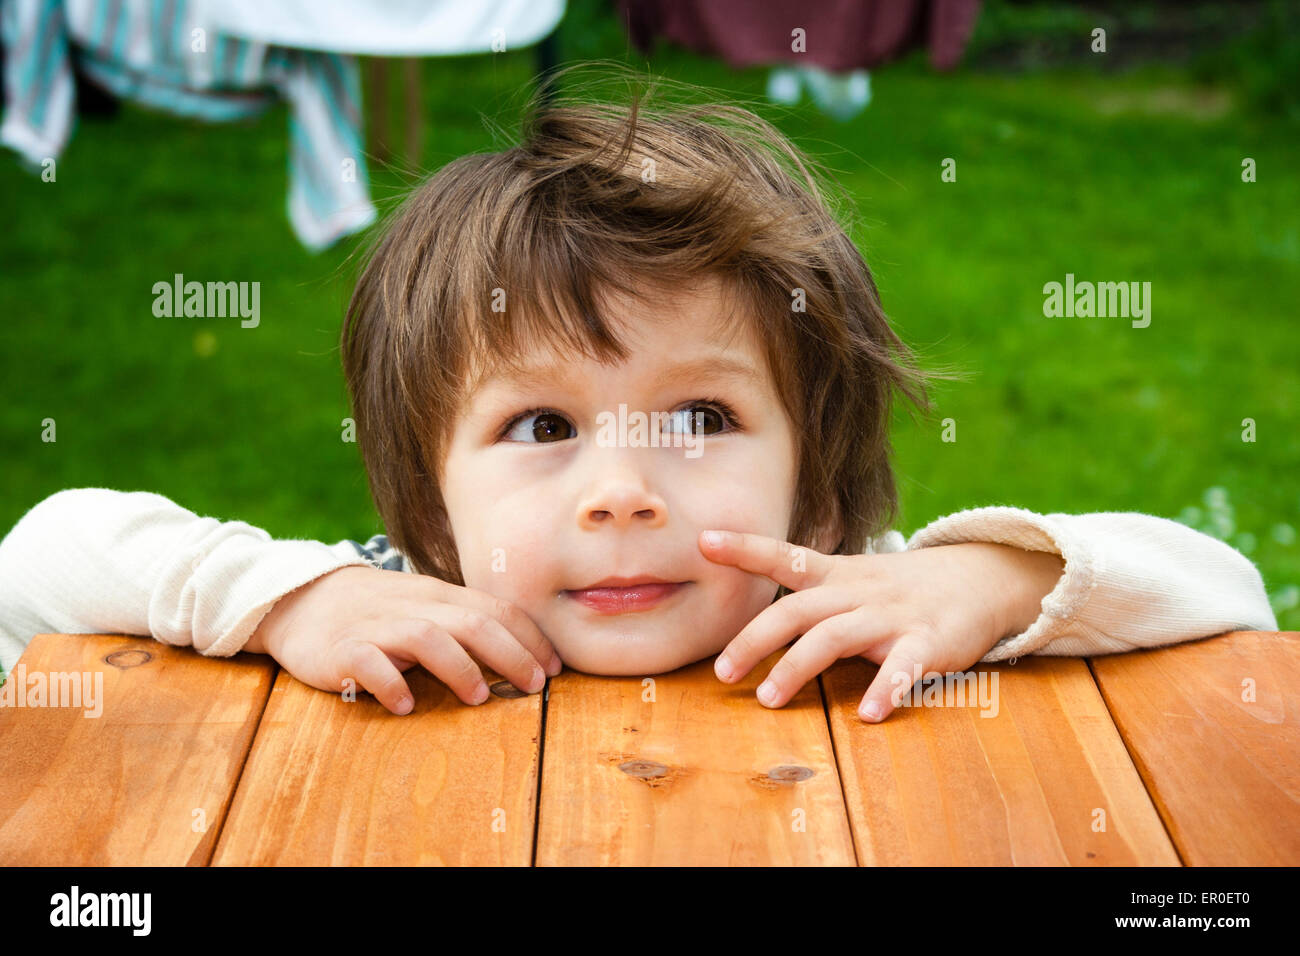 Close up of young child's face, boy, 3-4 year old, as he rests chin and hands on wooden platform, facing and looking to the side. Outdoors Stock Photo